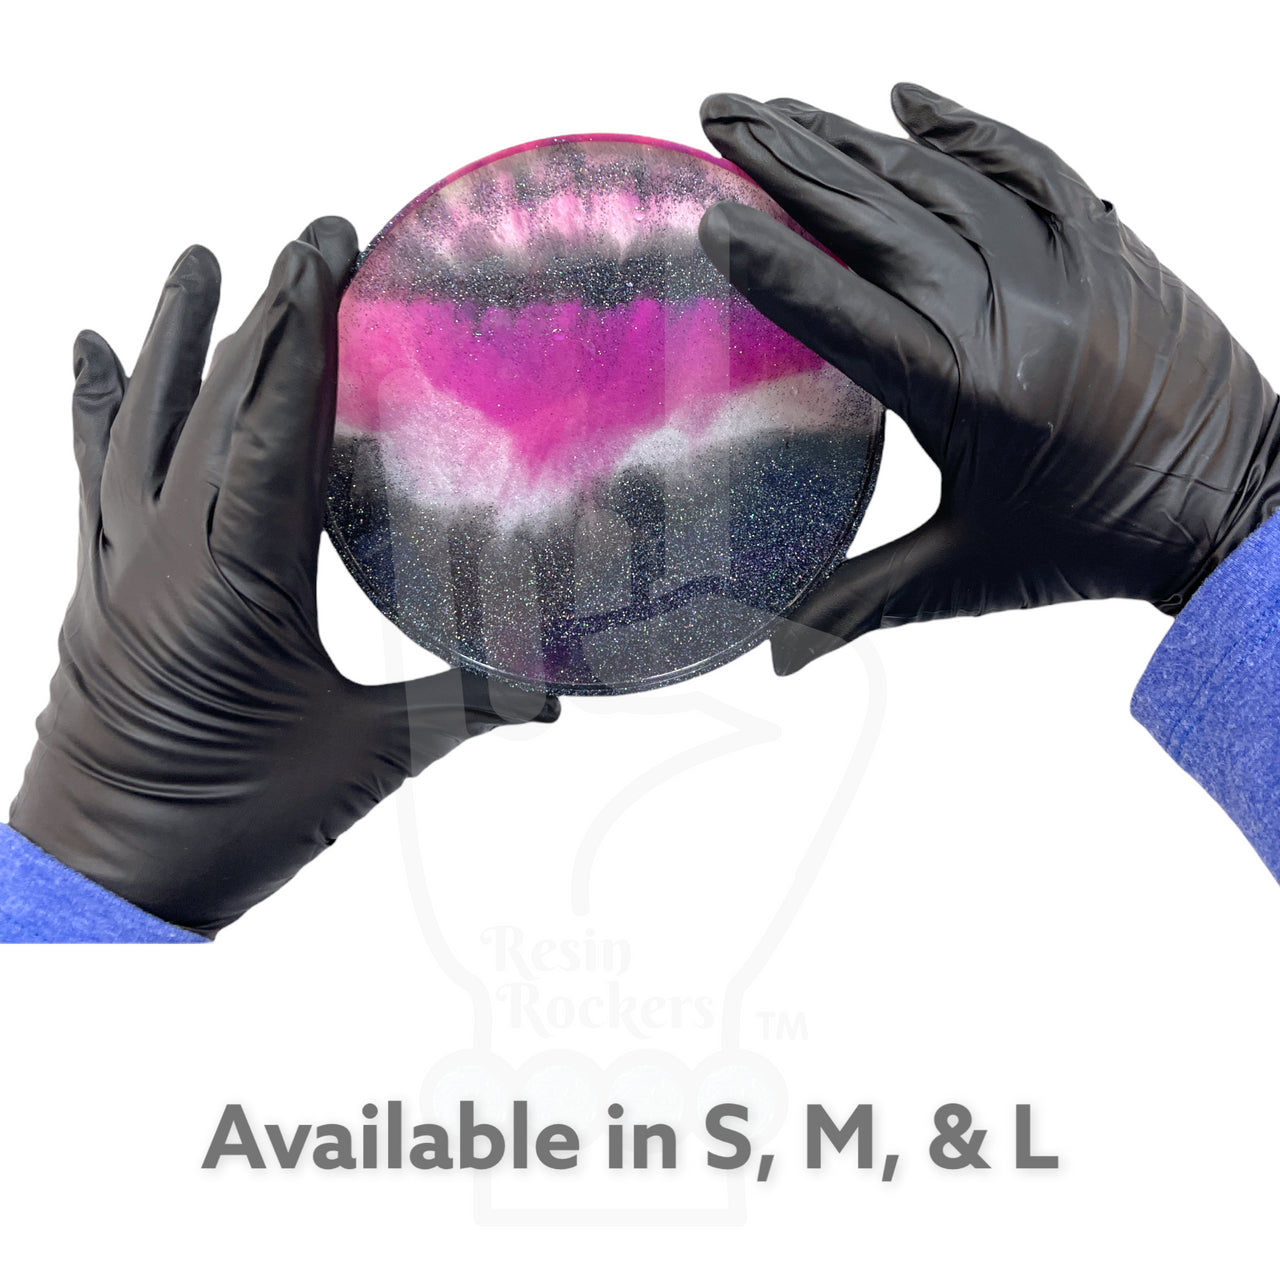 Ms. Mandy's Famous Heavy Duty Black Nitrile Gloves for Epoxy or UV Resin